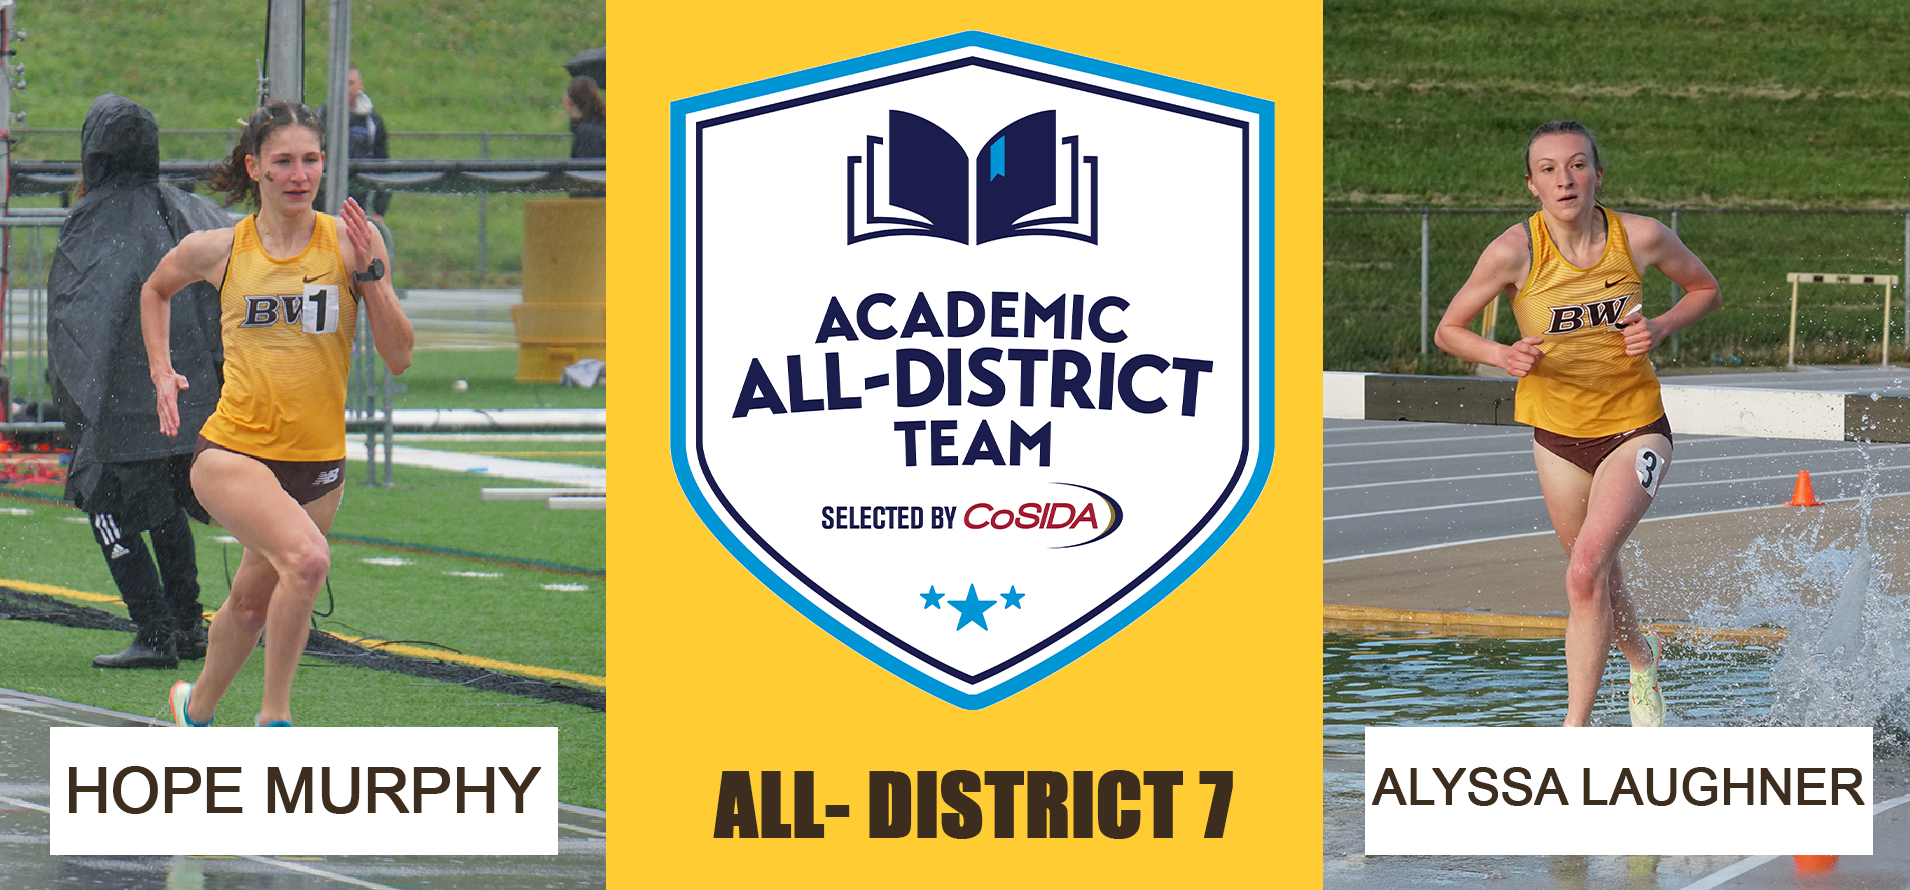 Laughner and Murphy Named to CoSIDA Academic All-District 7 Team